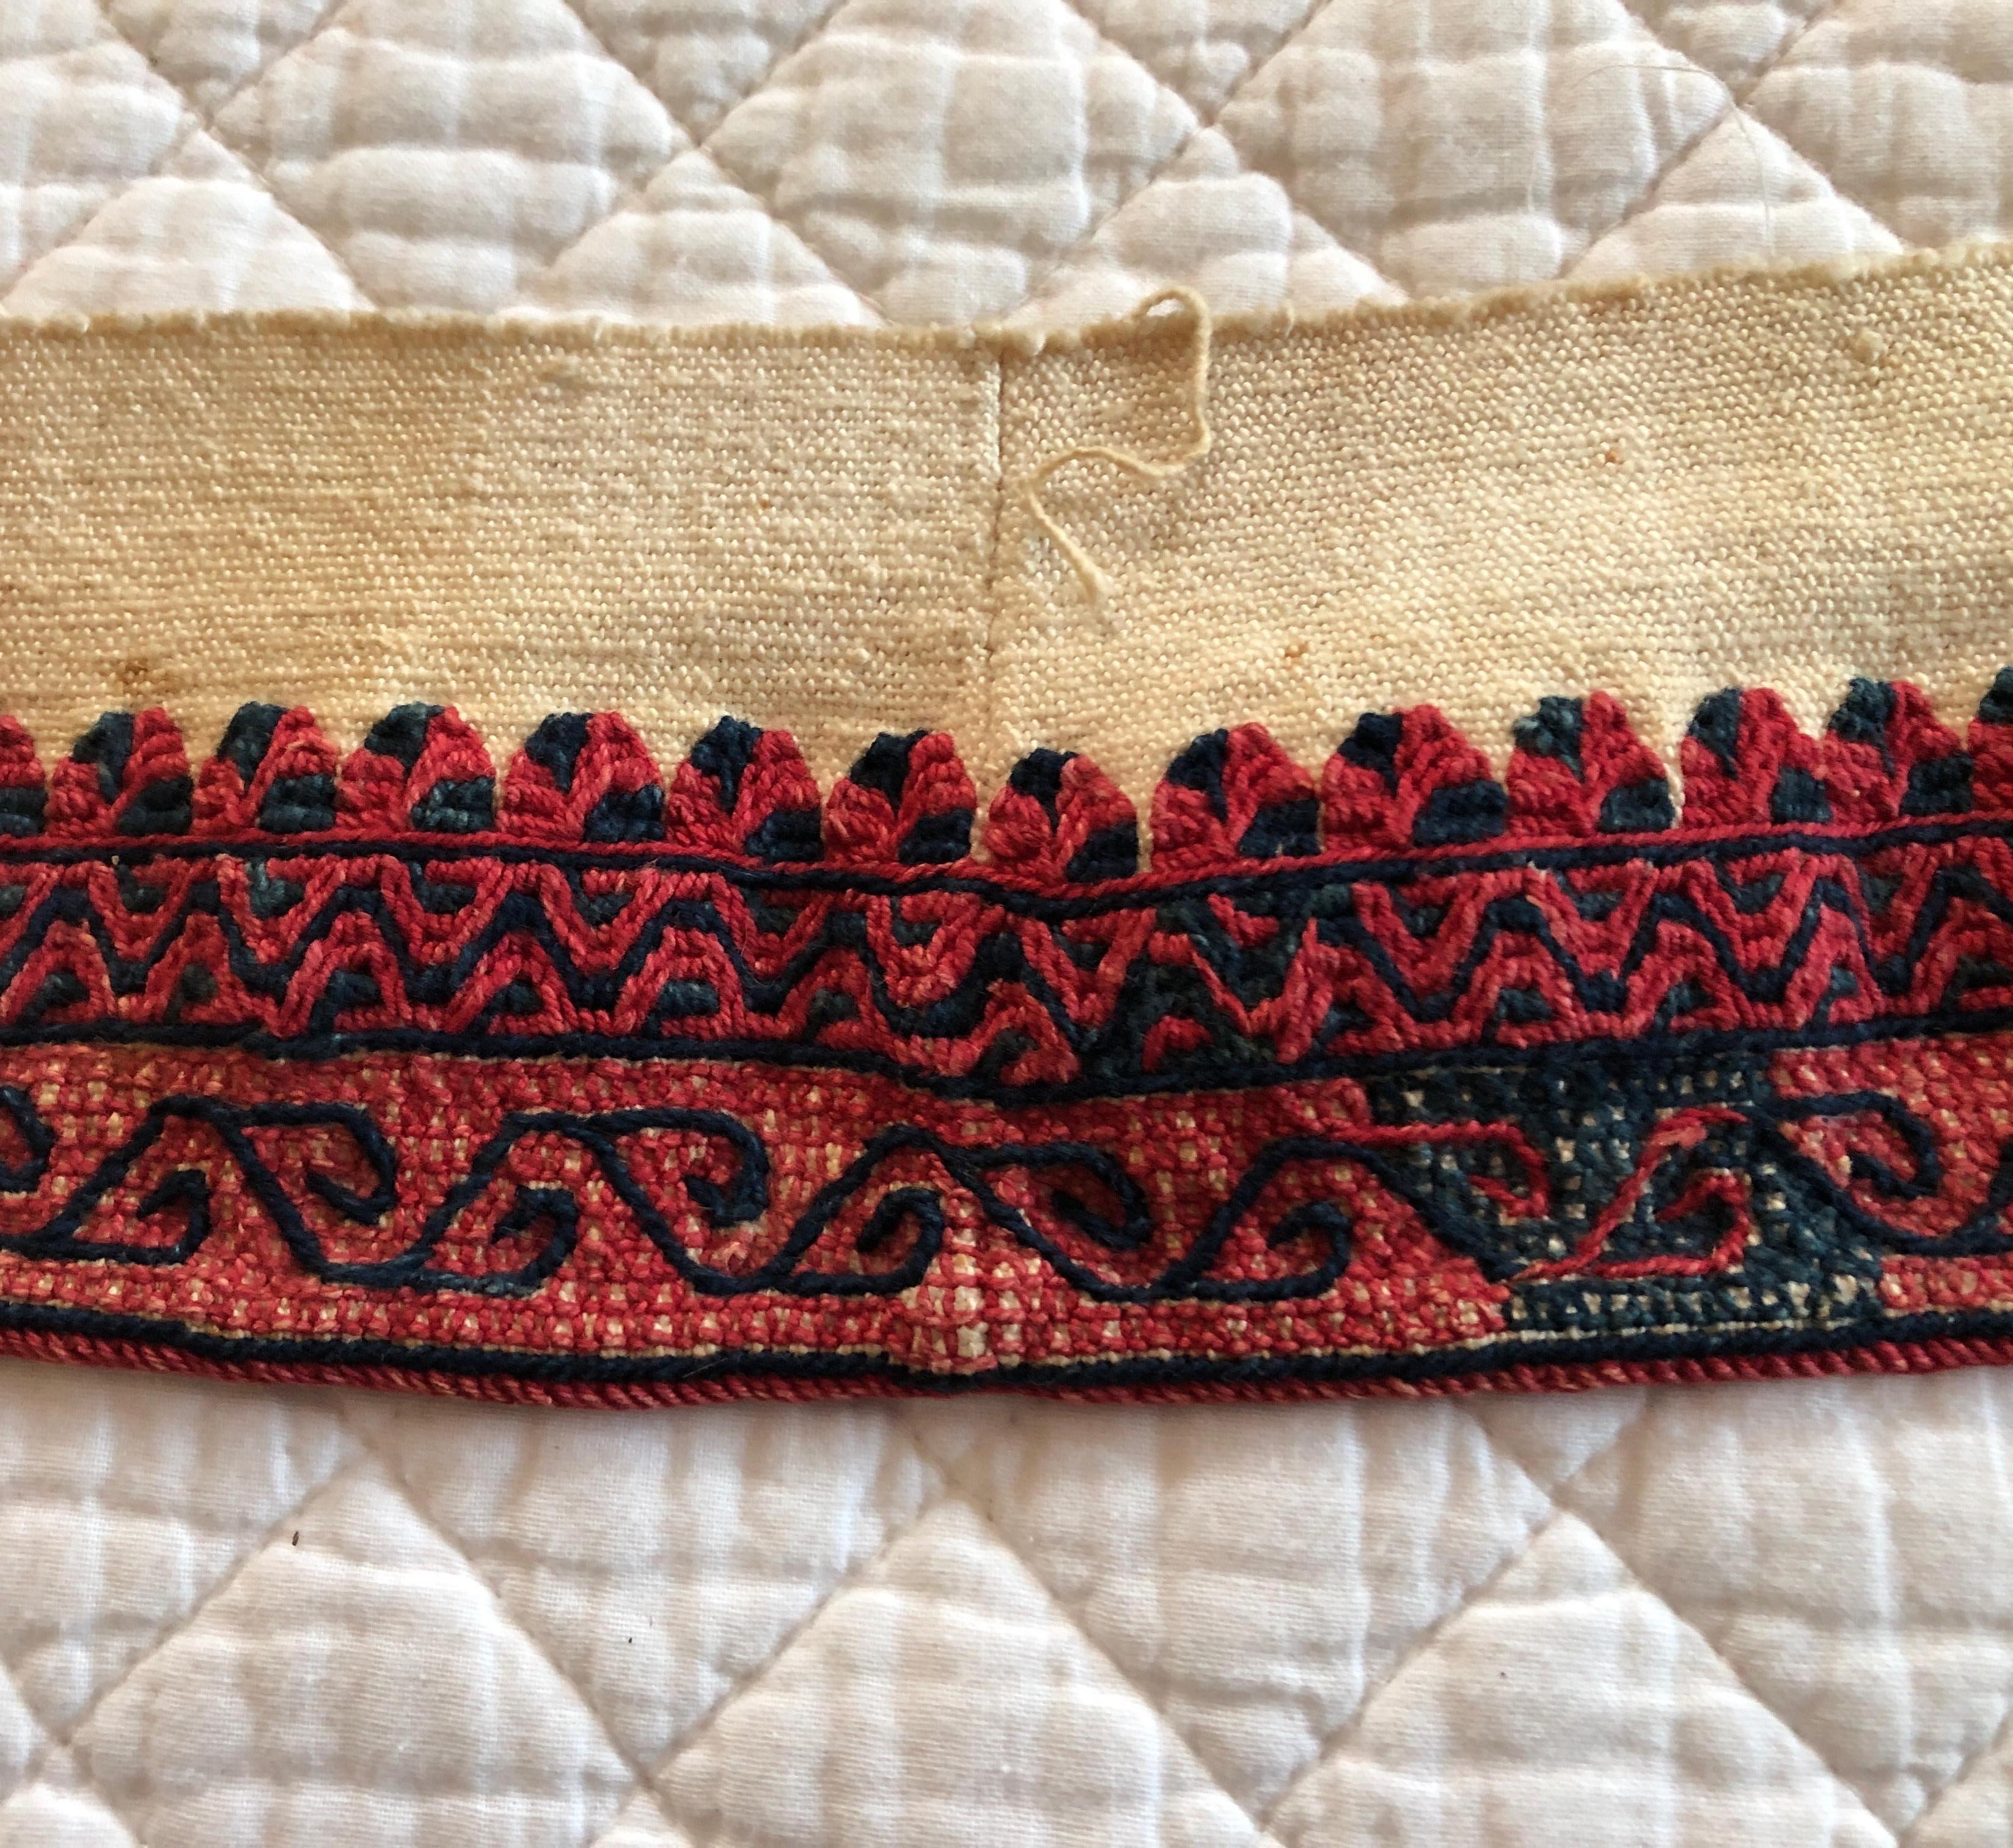 Antique red and blue woven decorative linen trim.
Ideal for pillows or upholstery.
Size: 3.75